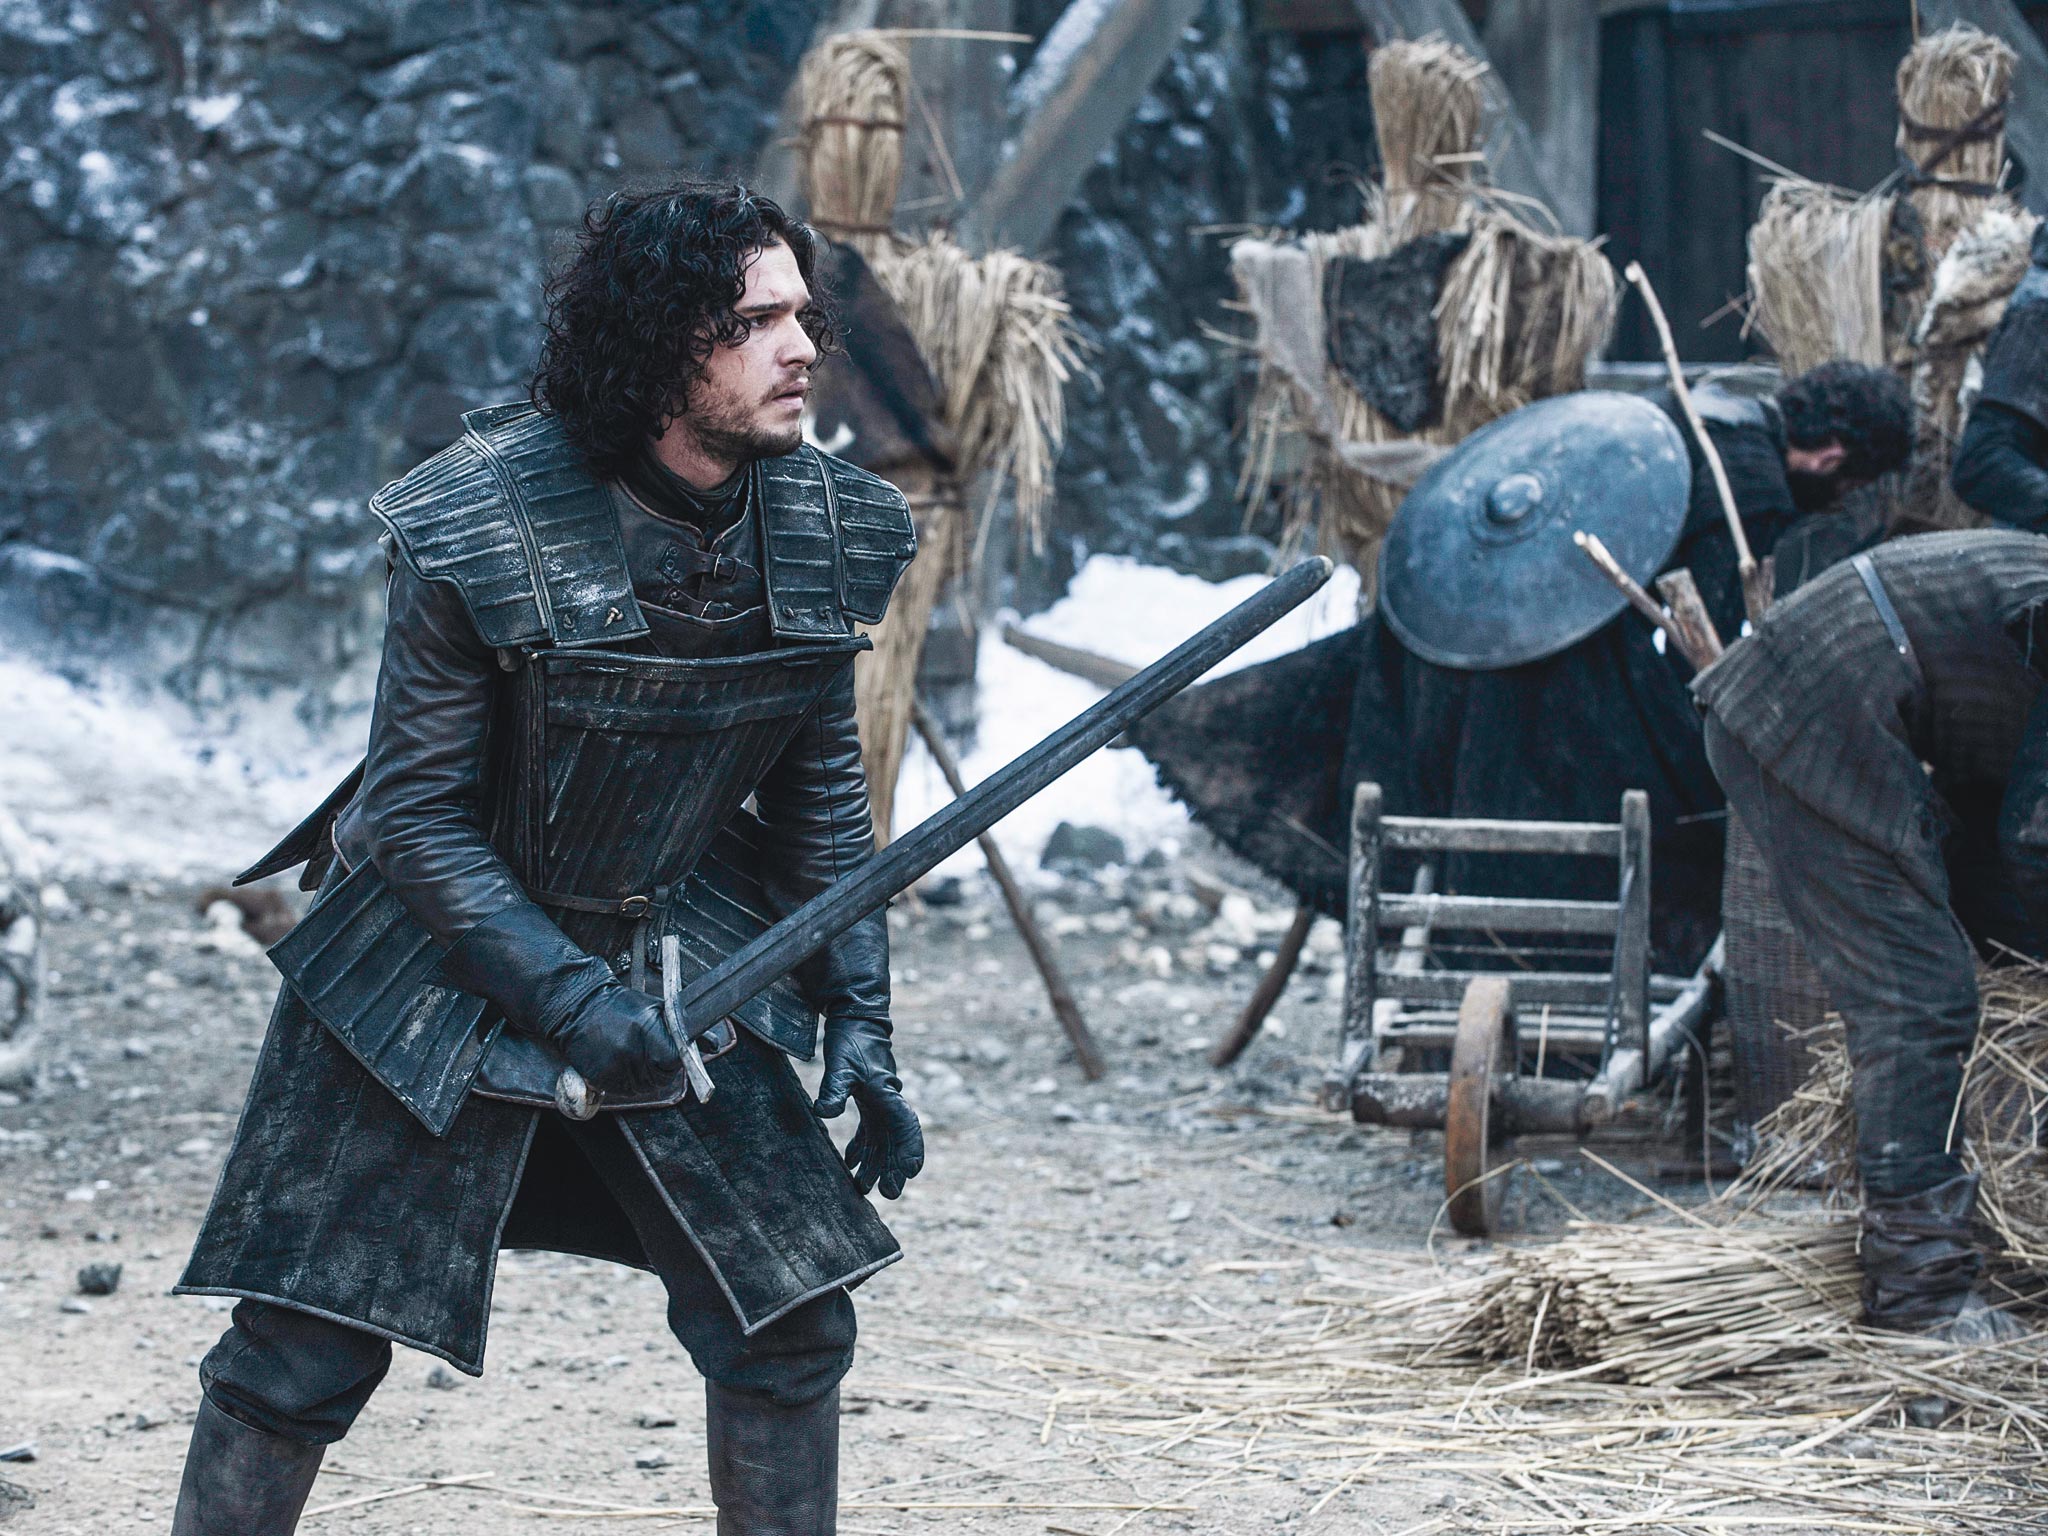 Jon Snow trains for battle in Game of Thrones, but will we be seeing similar scenes in The Last Kingdom?